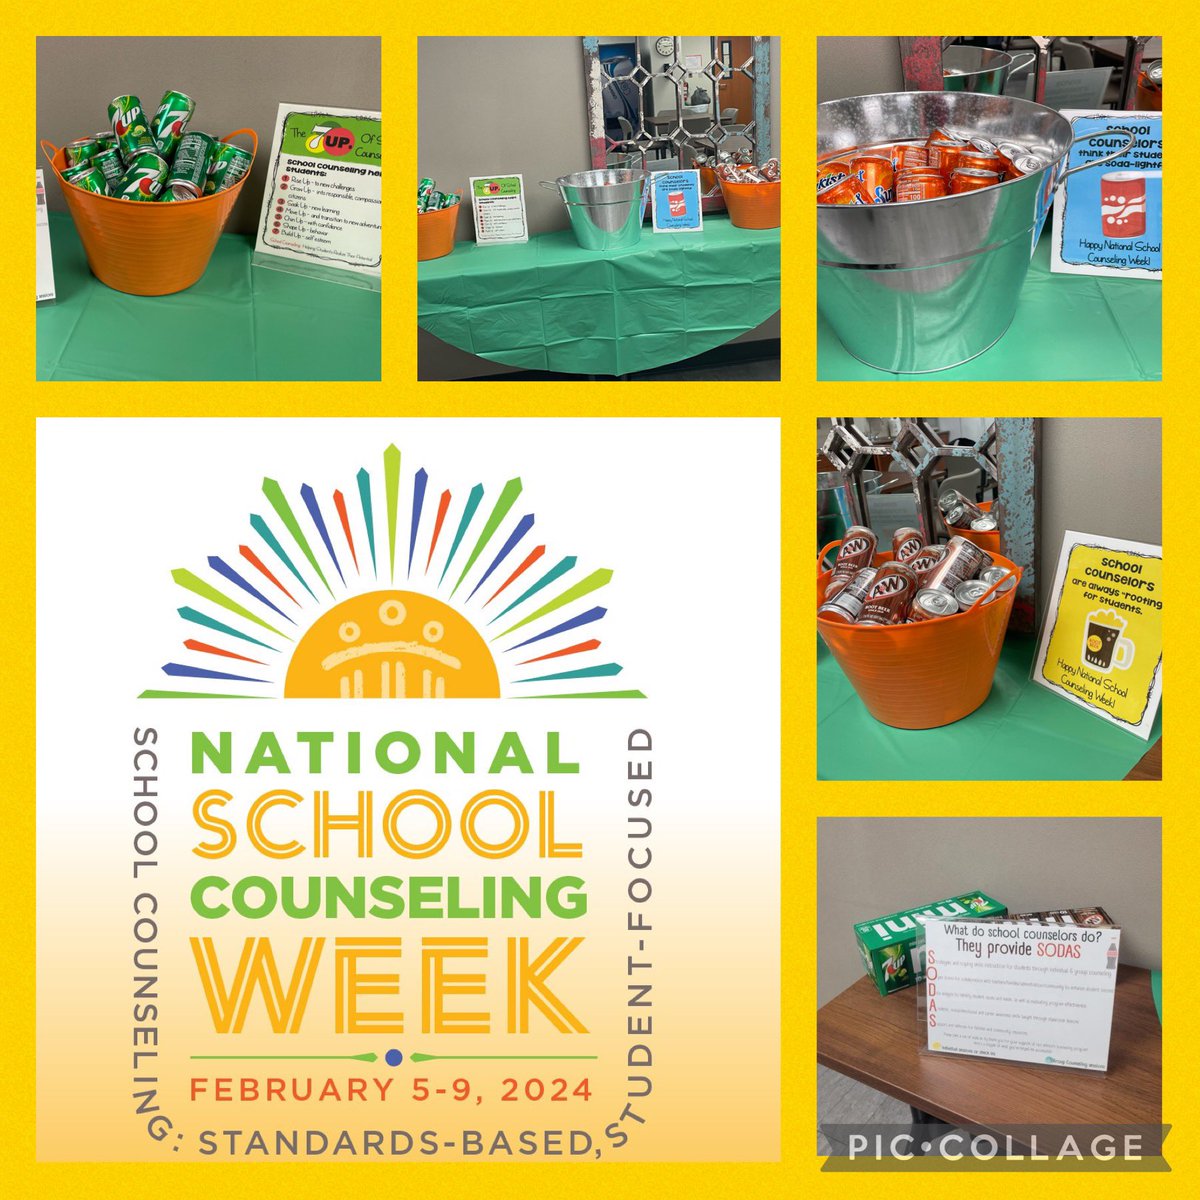 It’s National School Counseling Week and today our counselors taught our staff about the “7 Ups” of counseling while also providing refreshments.  They are “sod-amazing”! #NSCW2024 #theresnoplacelikearnold